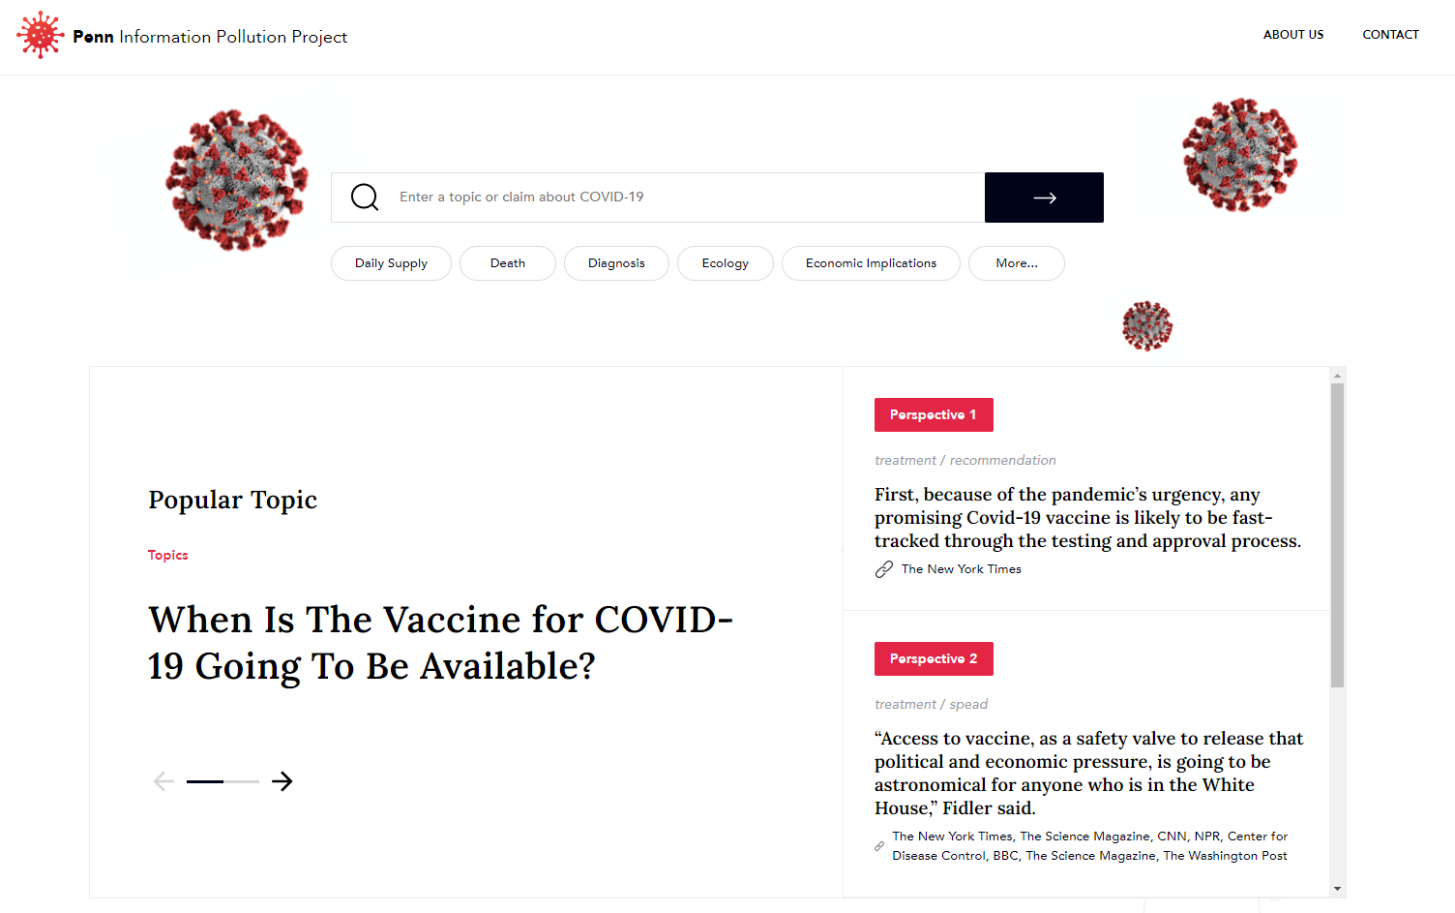 screenshot of penn information pollution project website, at the top is a search bar with topics including daily supply, death, diagnosis, ecology, economic implications, and more. the popular topic shown is "when is the vaccine for COVID-19 going to be available" and two perspectives are shown on the right